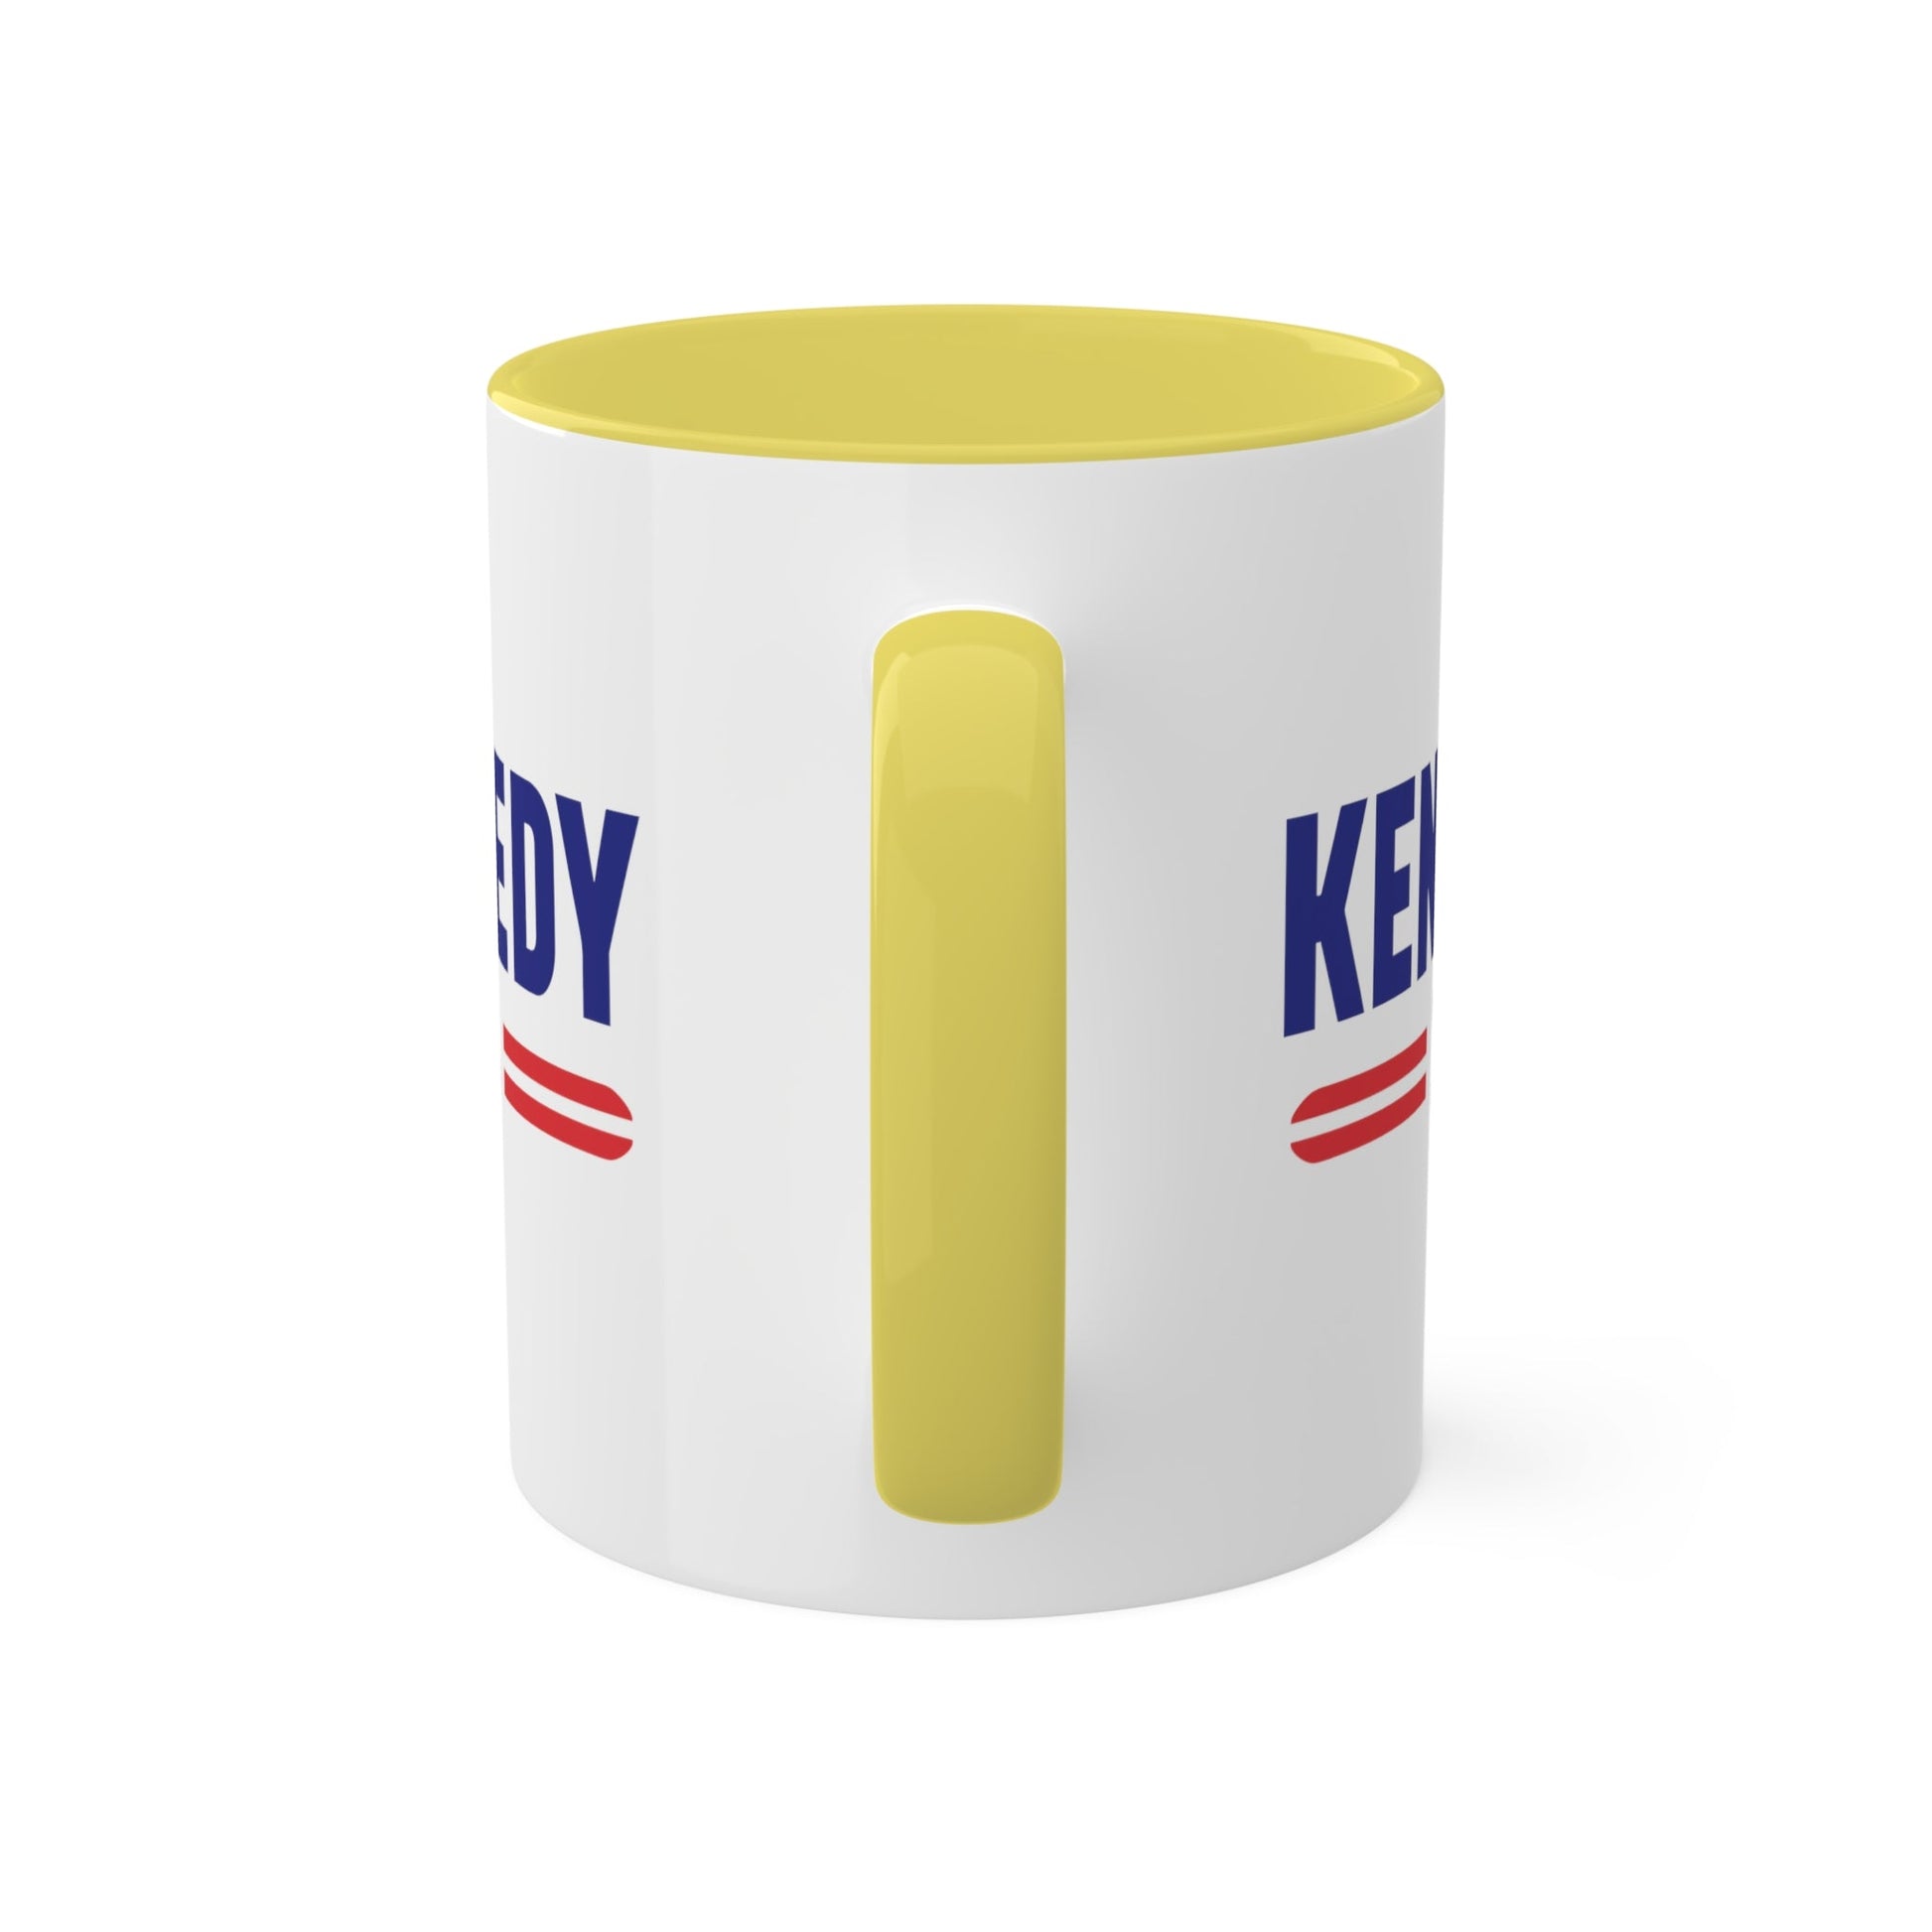 Kennedy Classic Accent Coffee Mug II (11oz) - TEAM KENNEDY. All rights reserved